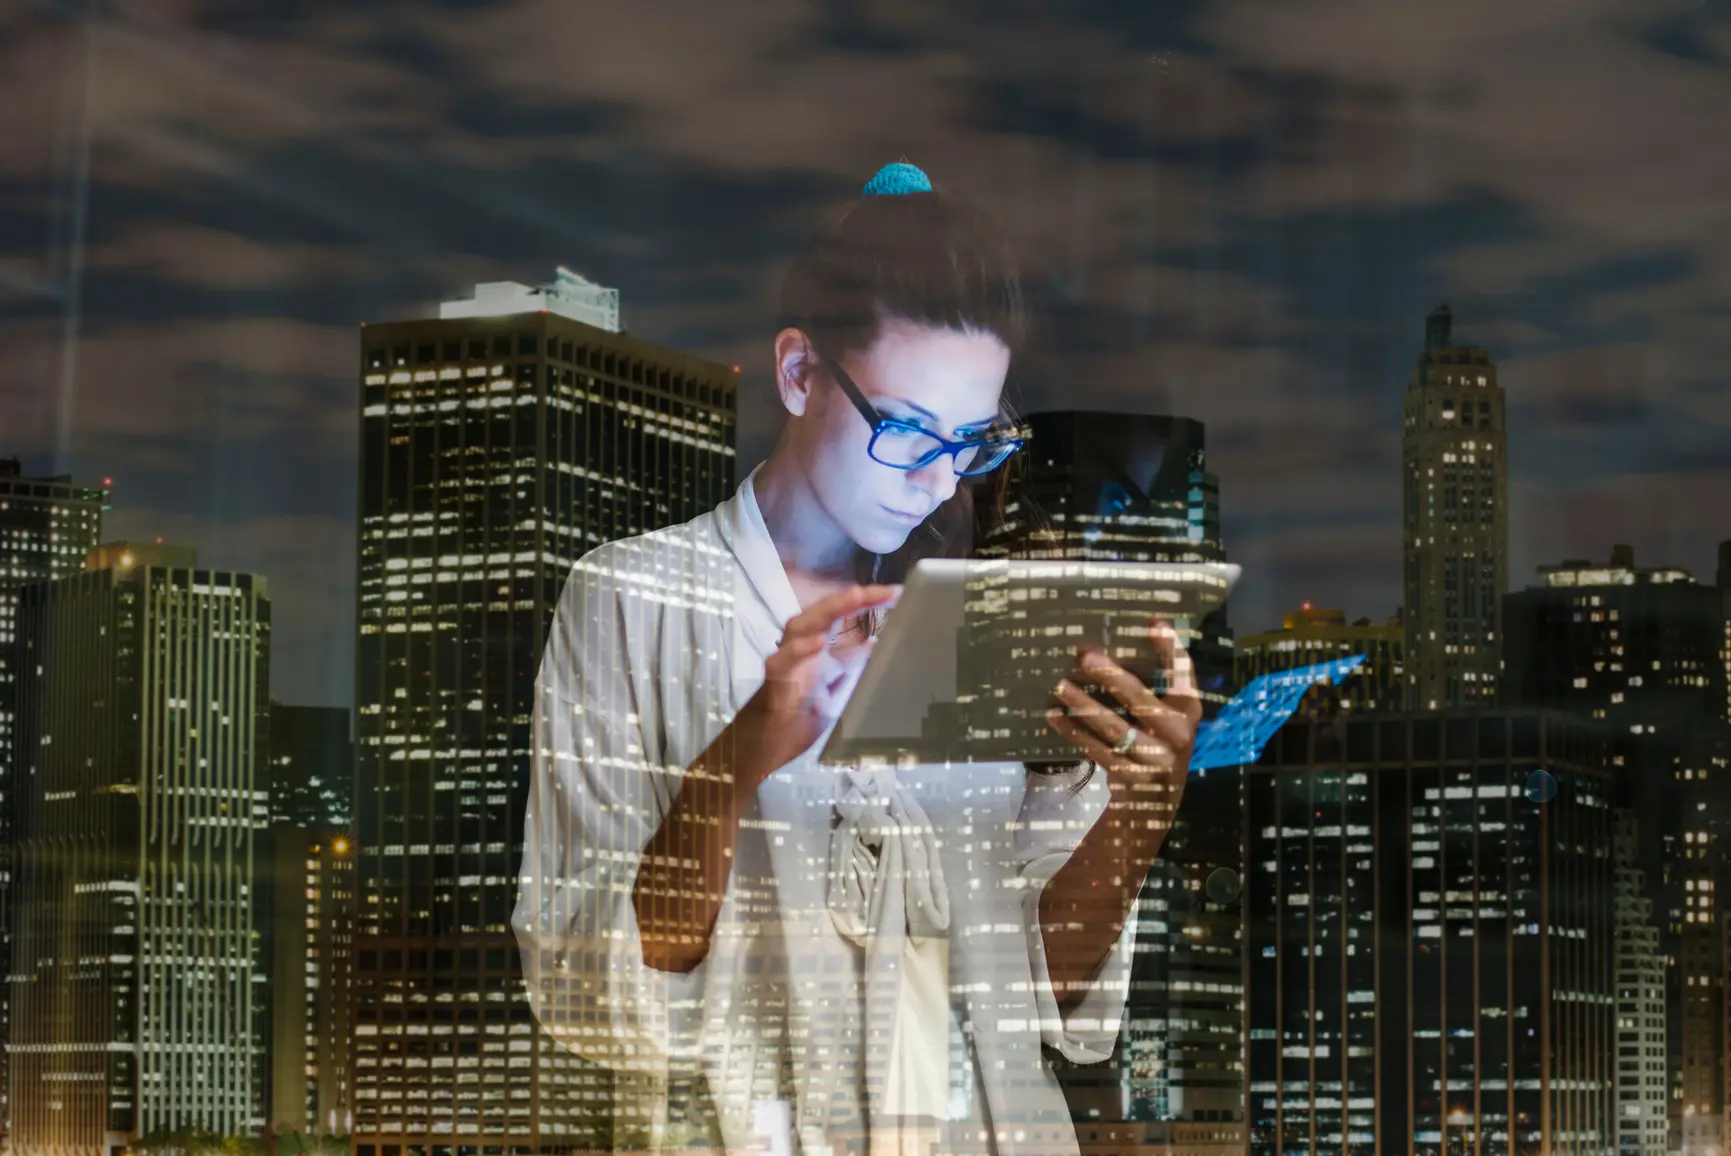 A woman looks at her tablet at night, the skyline of a city can be seen in the background.